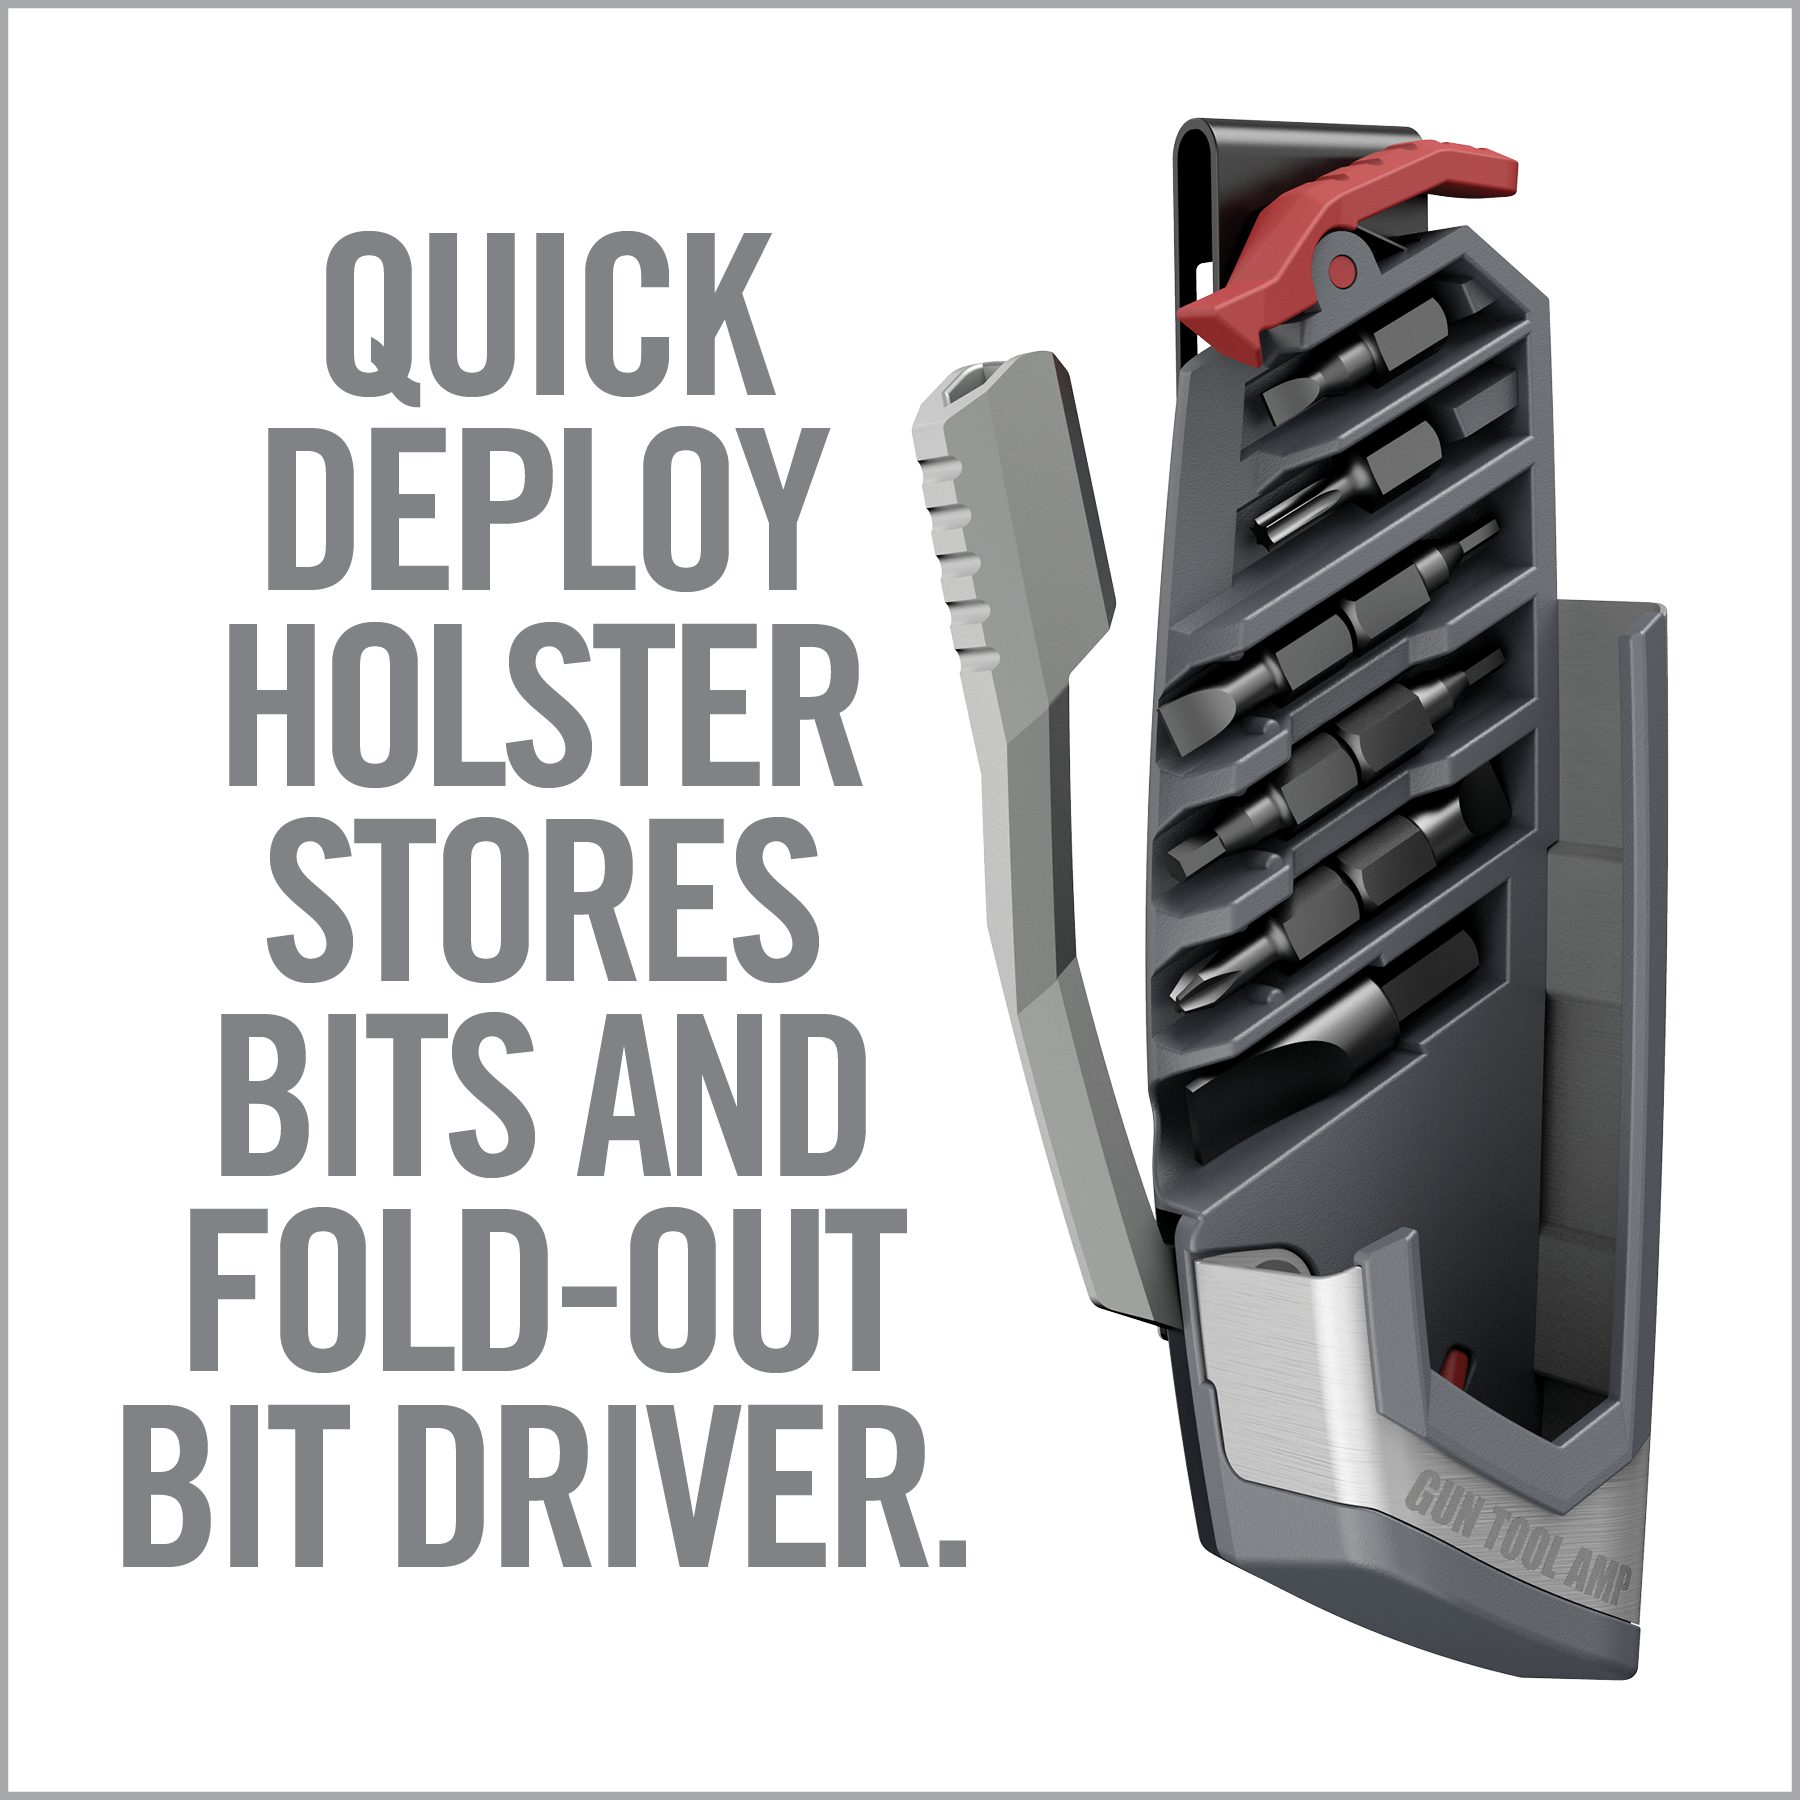 an advertisement for a computer store with tools in it